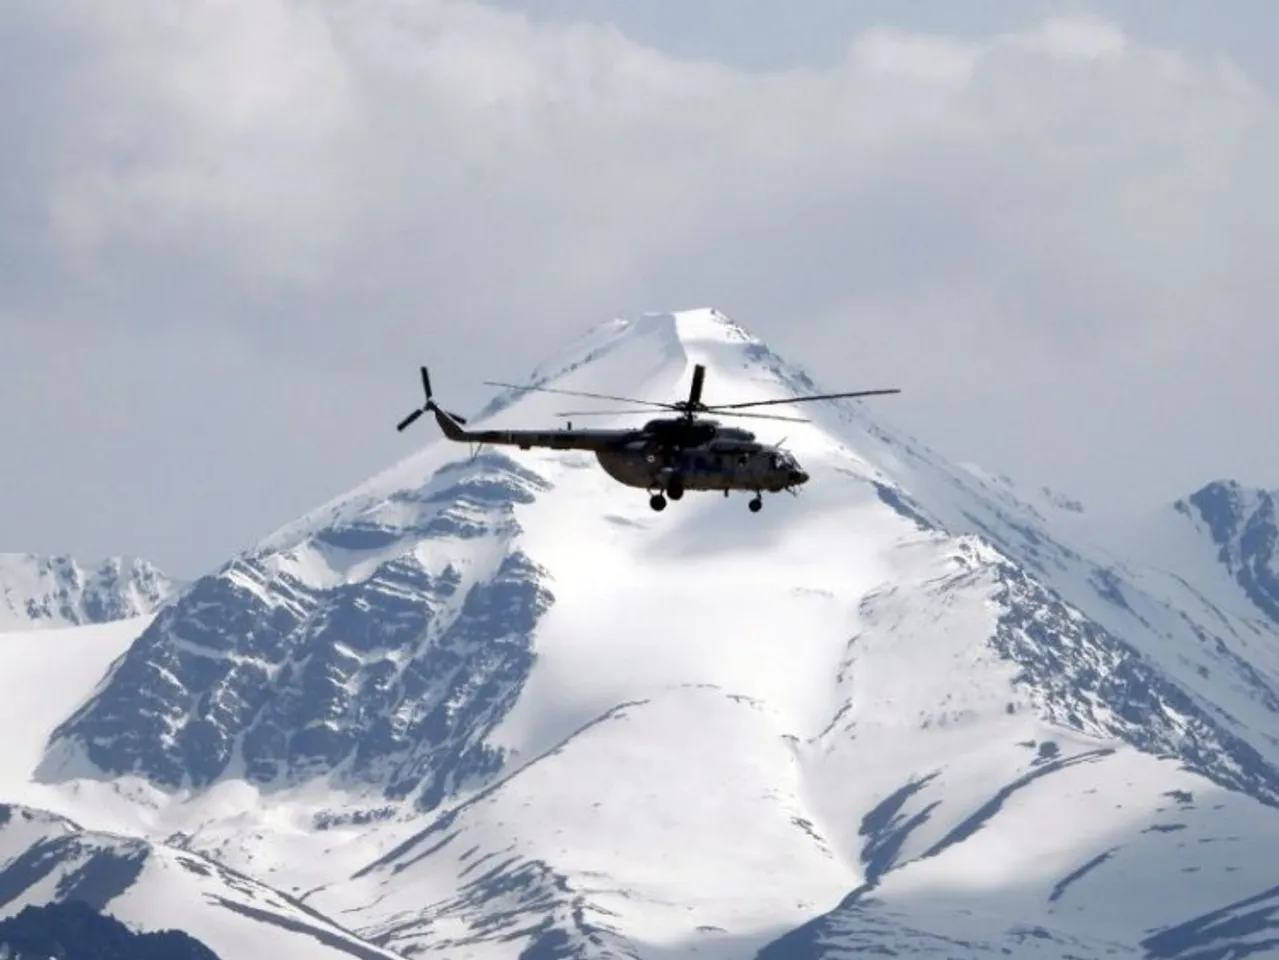 Helicopter services open for tourists in Ladakh